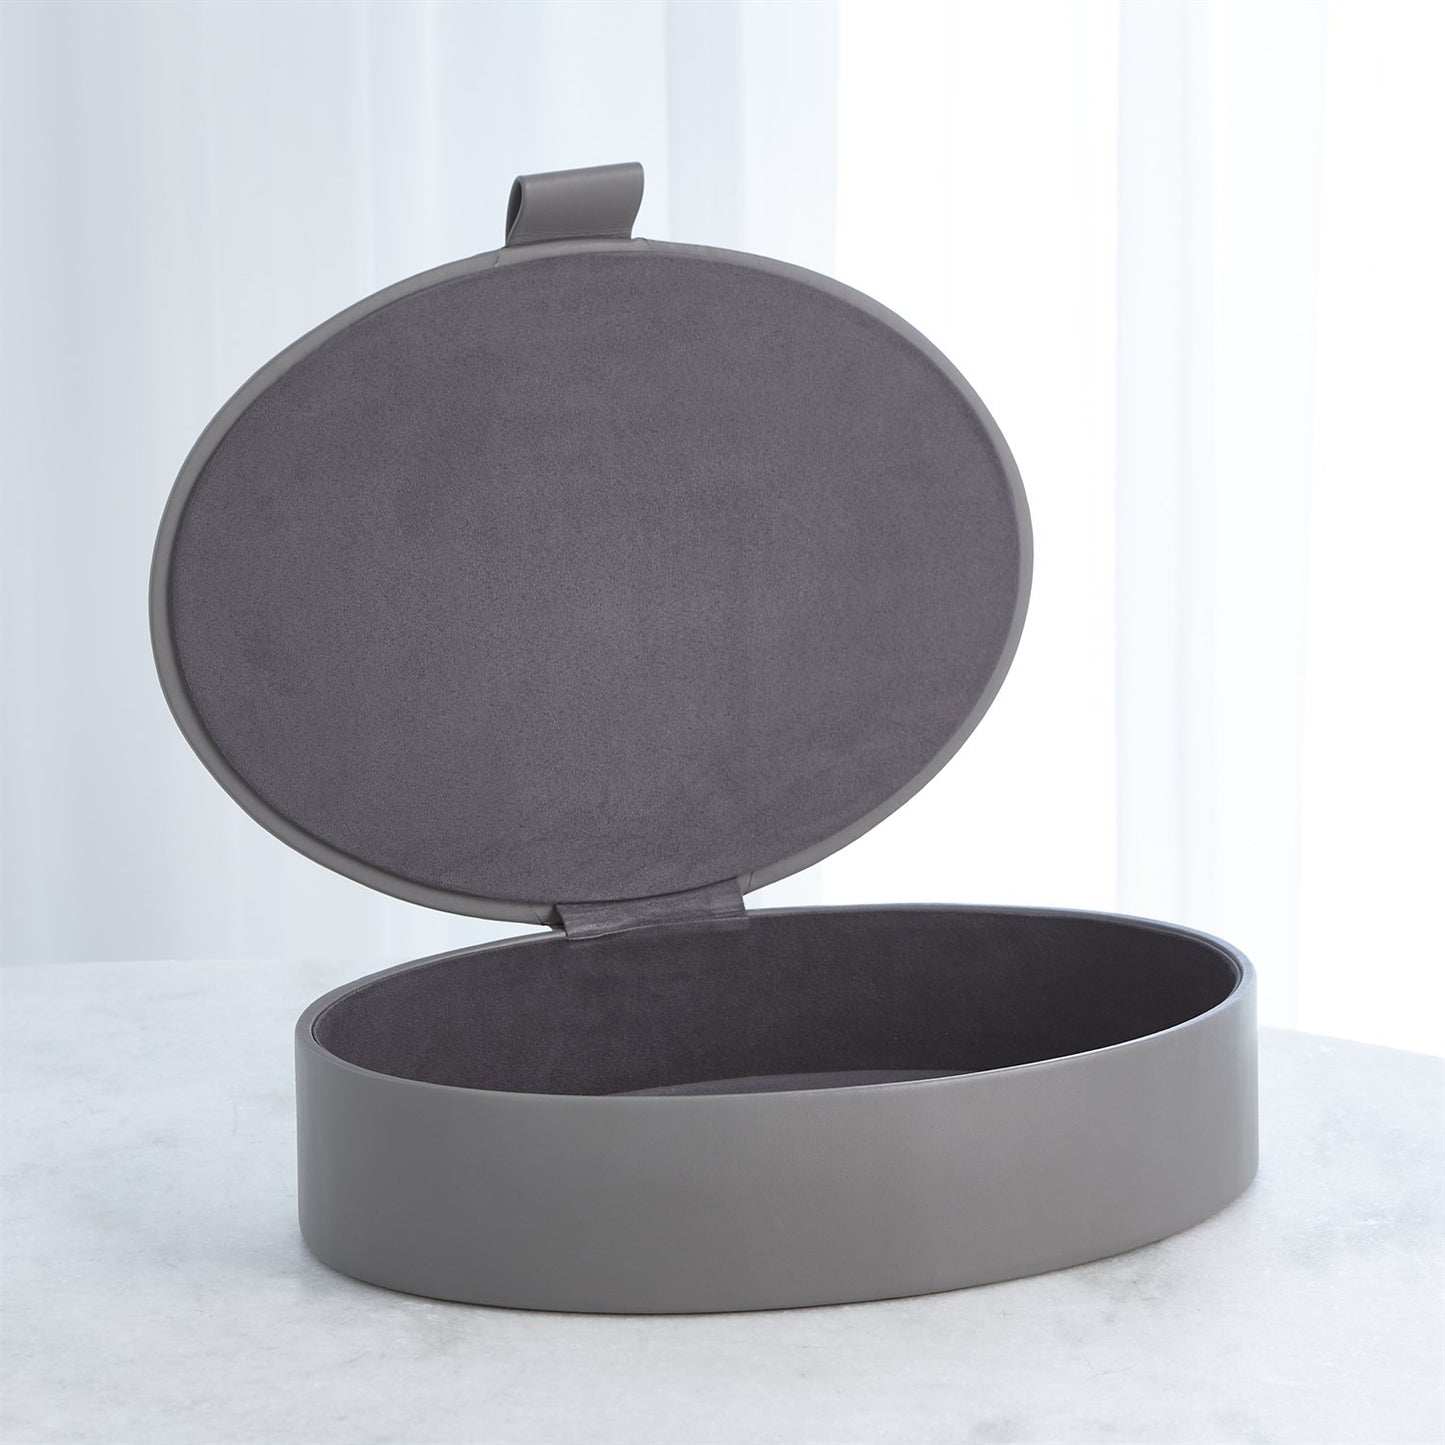 Barbara Barry Signature Oval Leather Box - Marble Gray